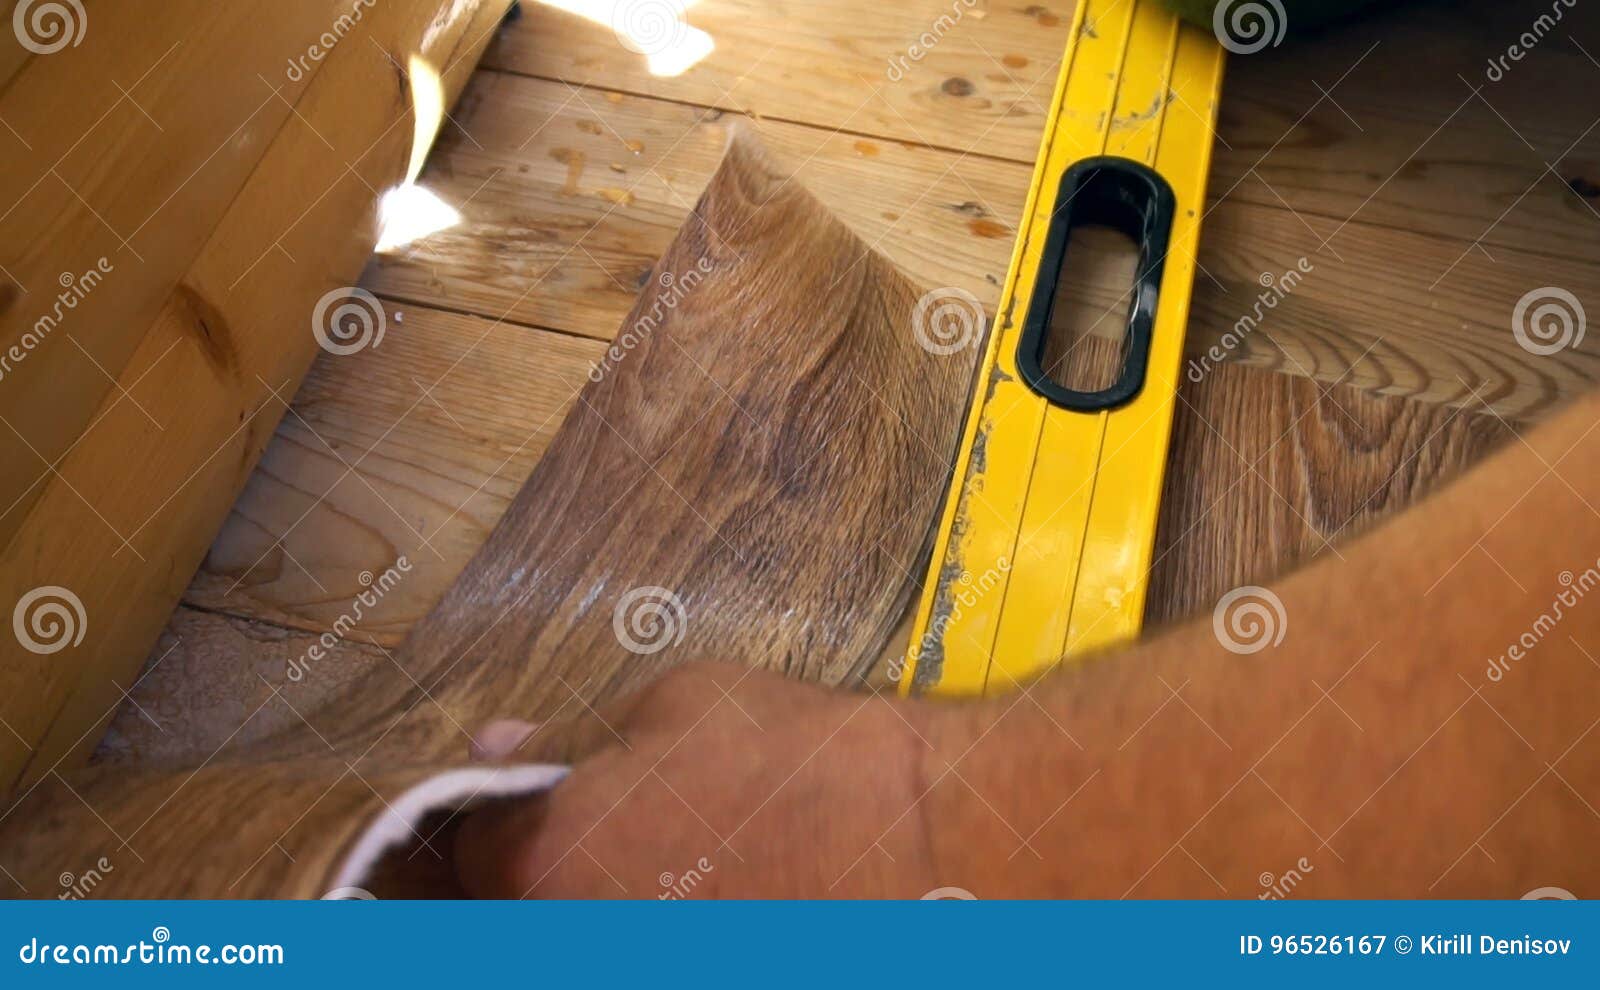 The Worker Cuts Off The Linoleum With A Utility Knife Fitting Of